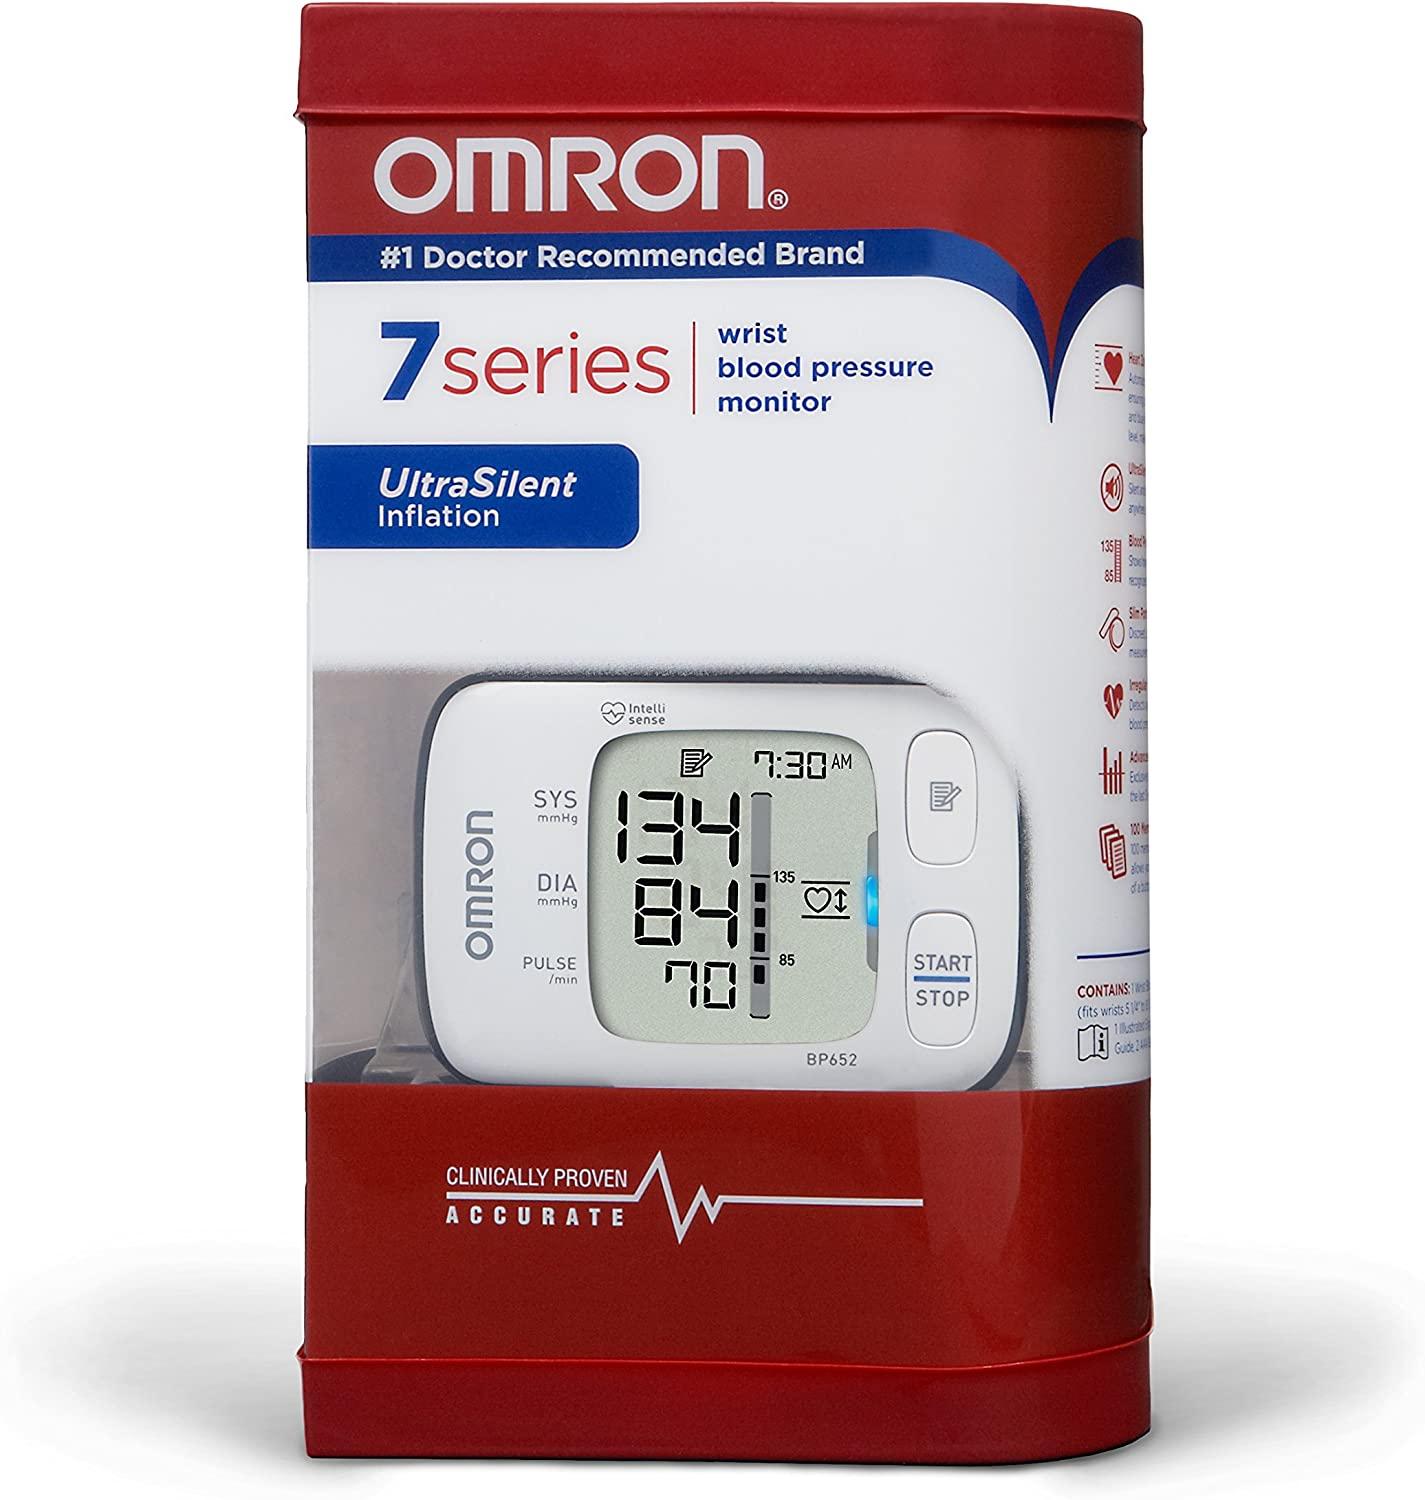 Omron 7 Series Wrist Blood Pressure Monitor 100-Reading Memory with Heart  Zone Guidance and UltraSilent Inflation by Omron